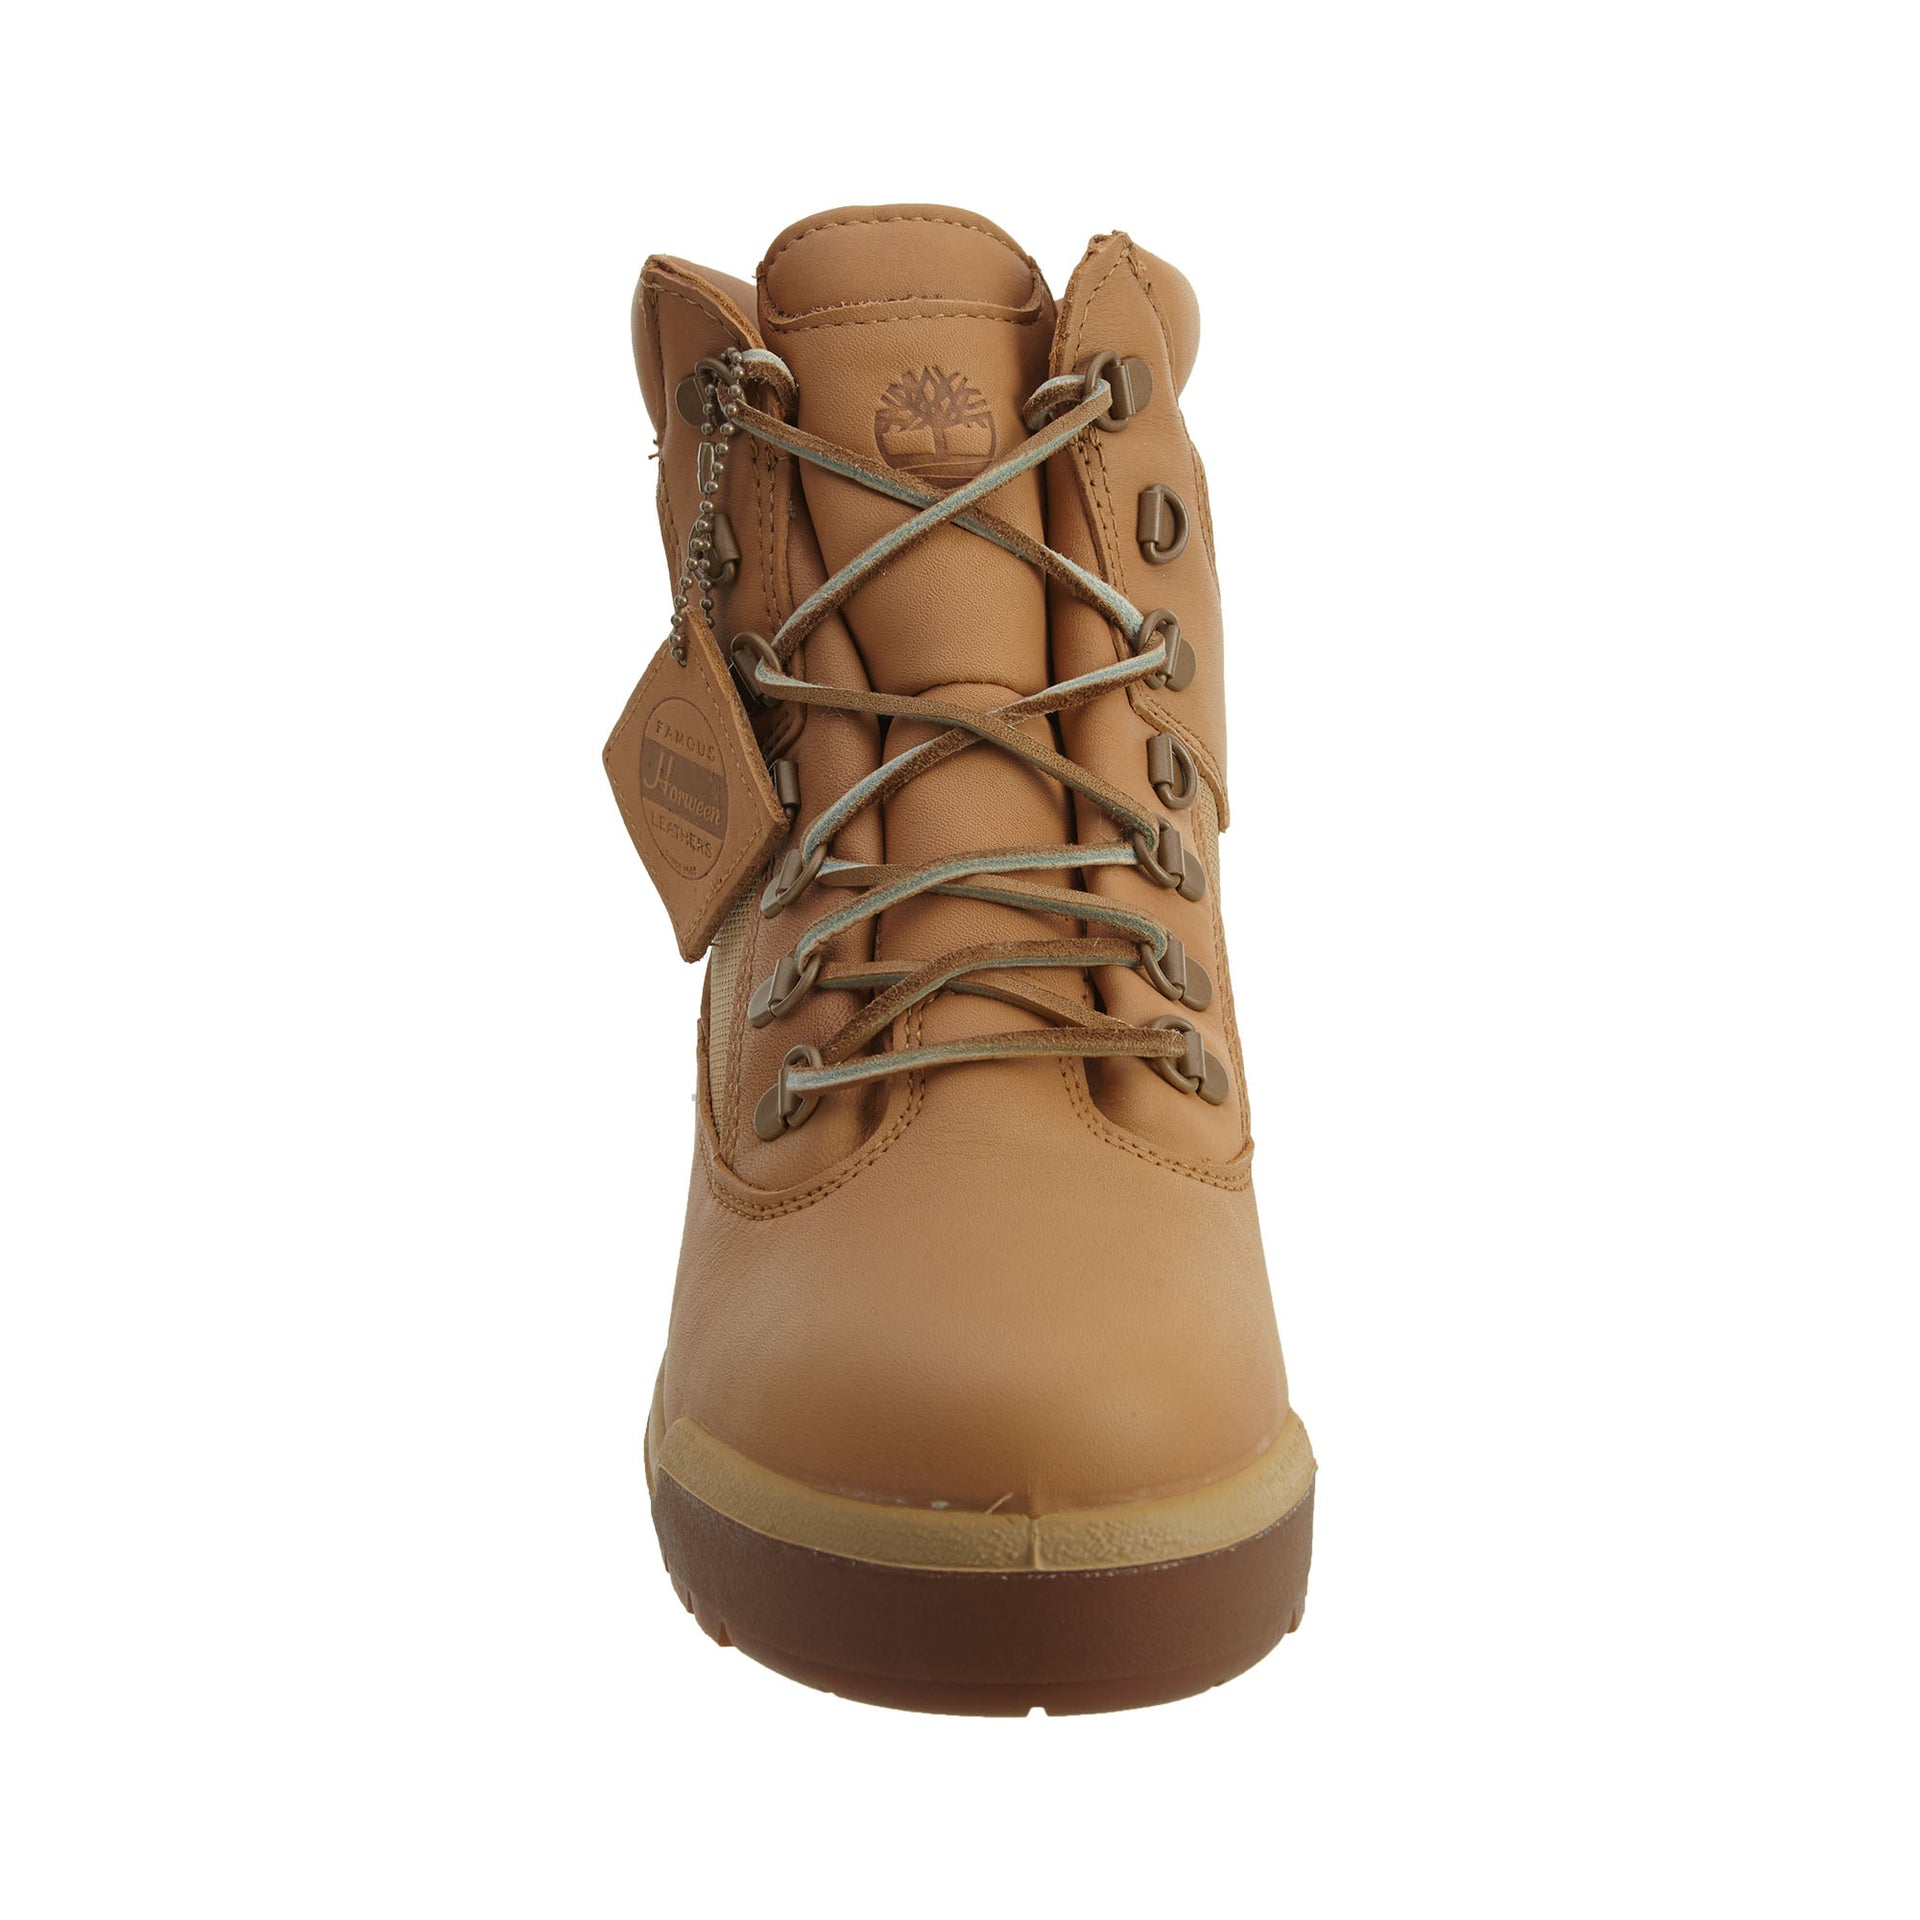 Timberland Field Boot 6 Inch Waterproof Mens Style : Tb0a1kt7